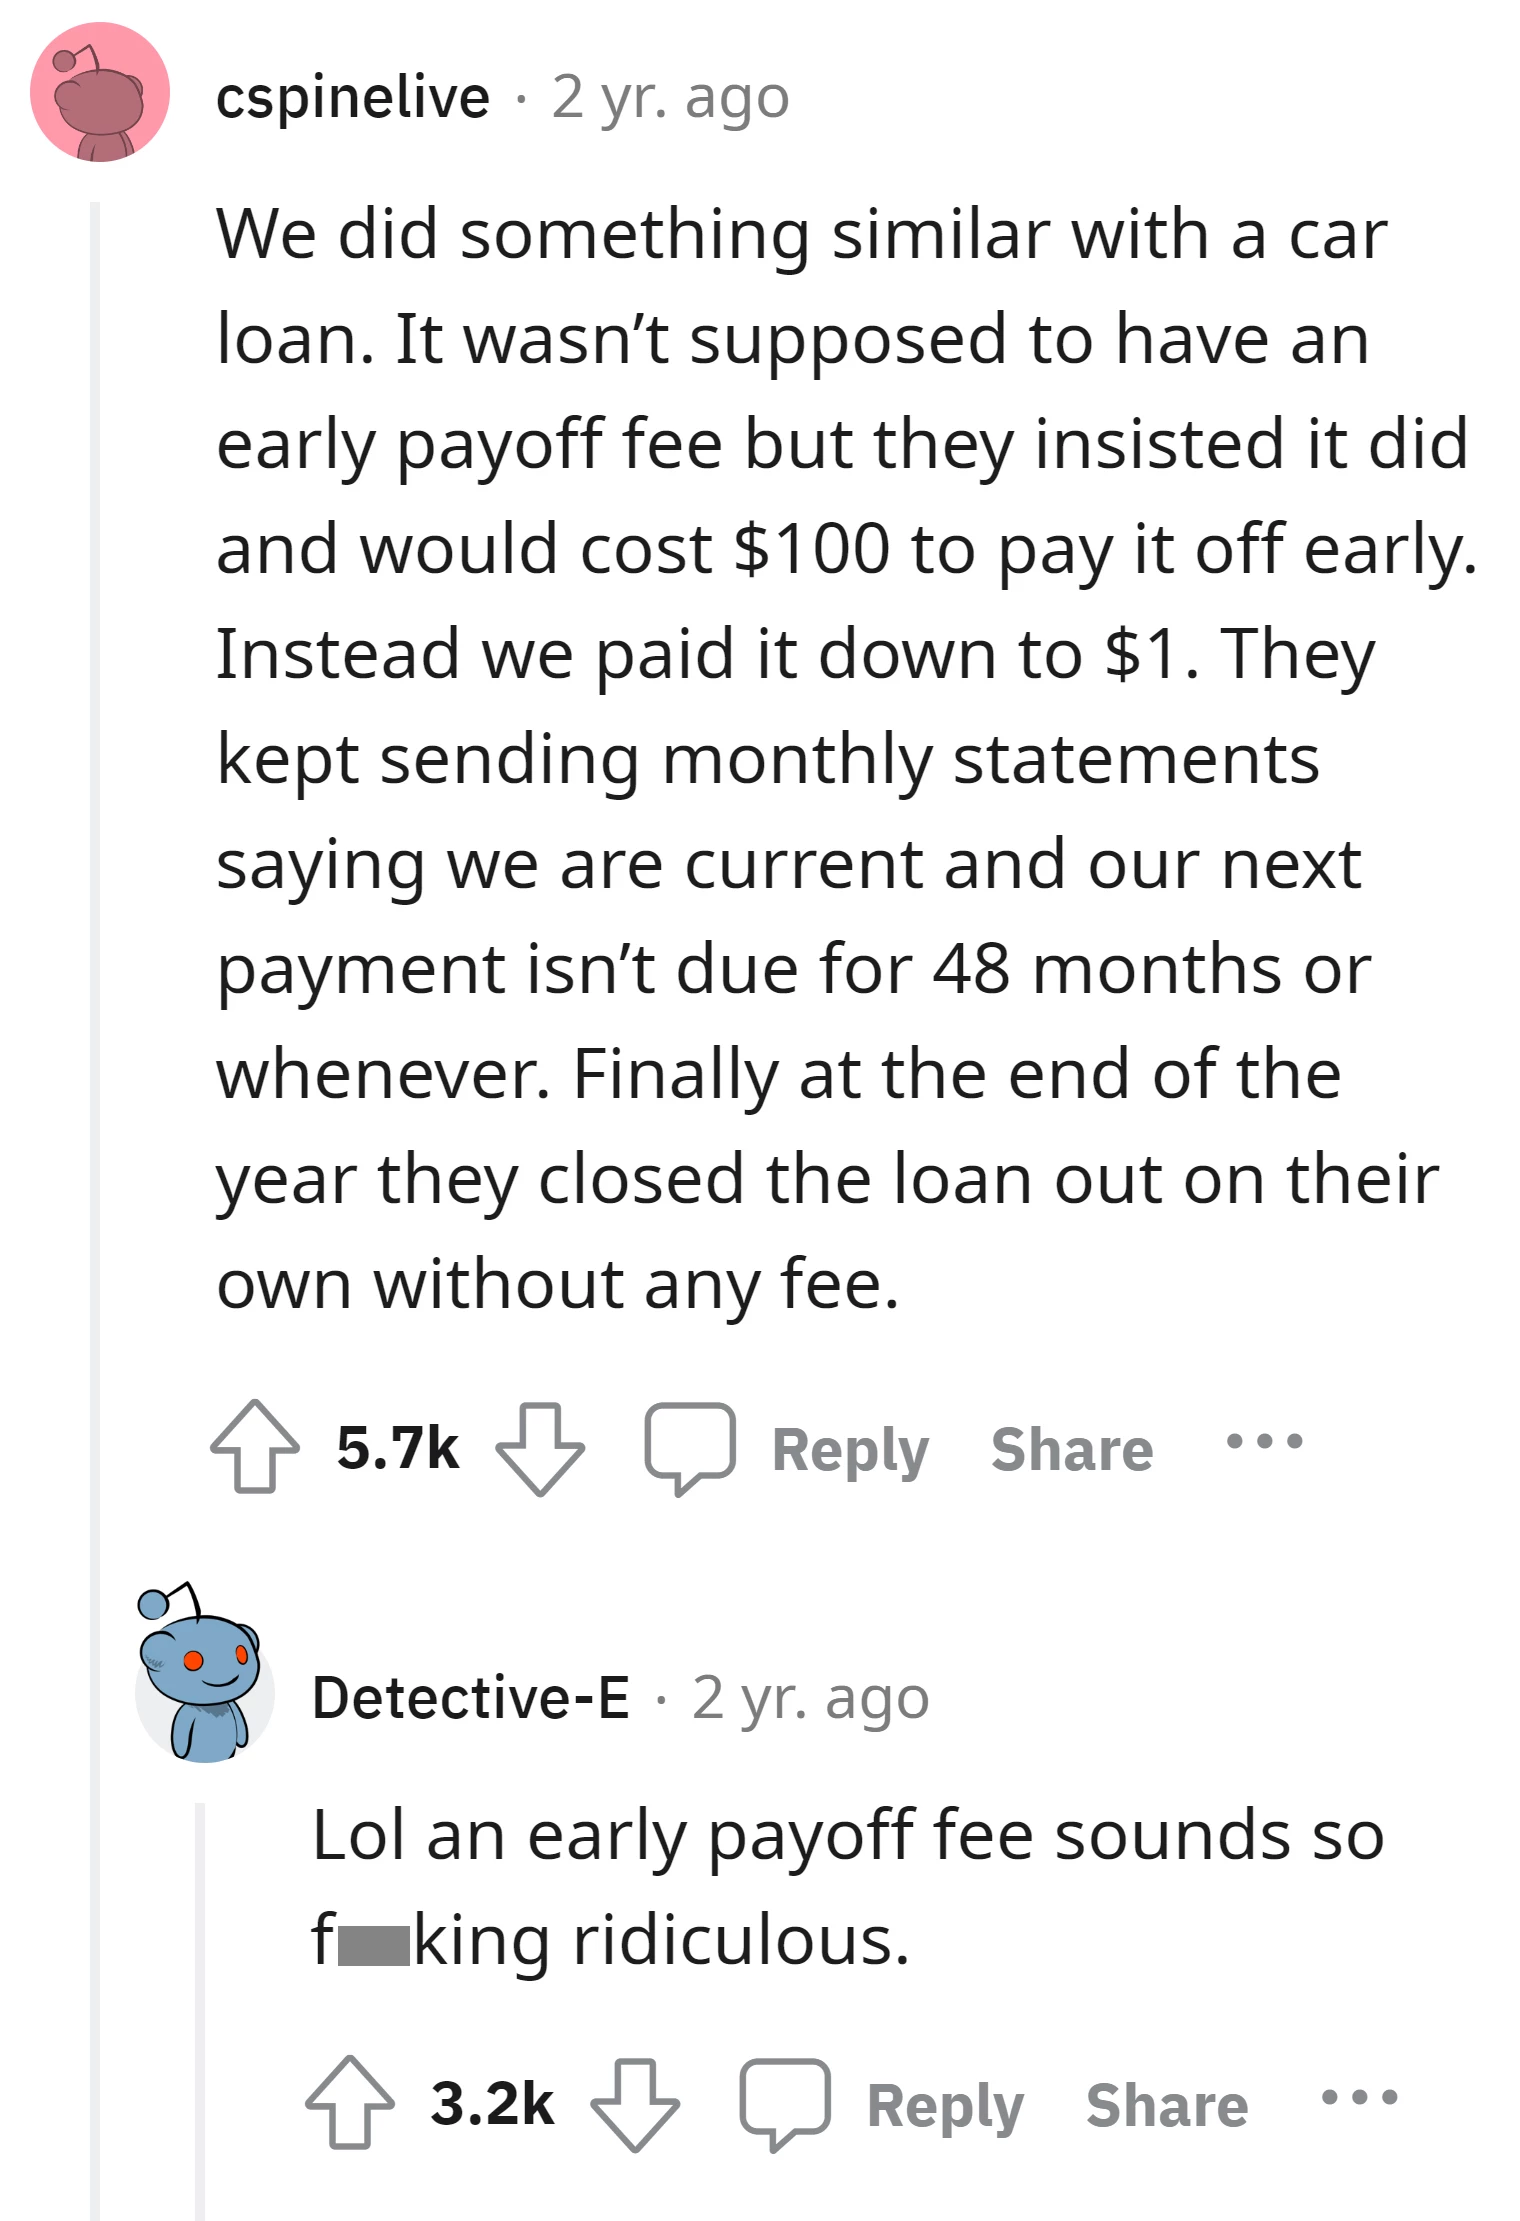 This commenter shares a similar story